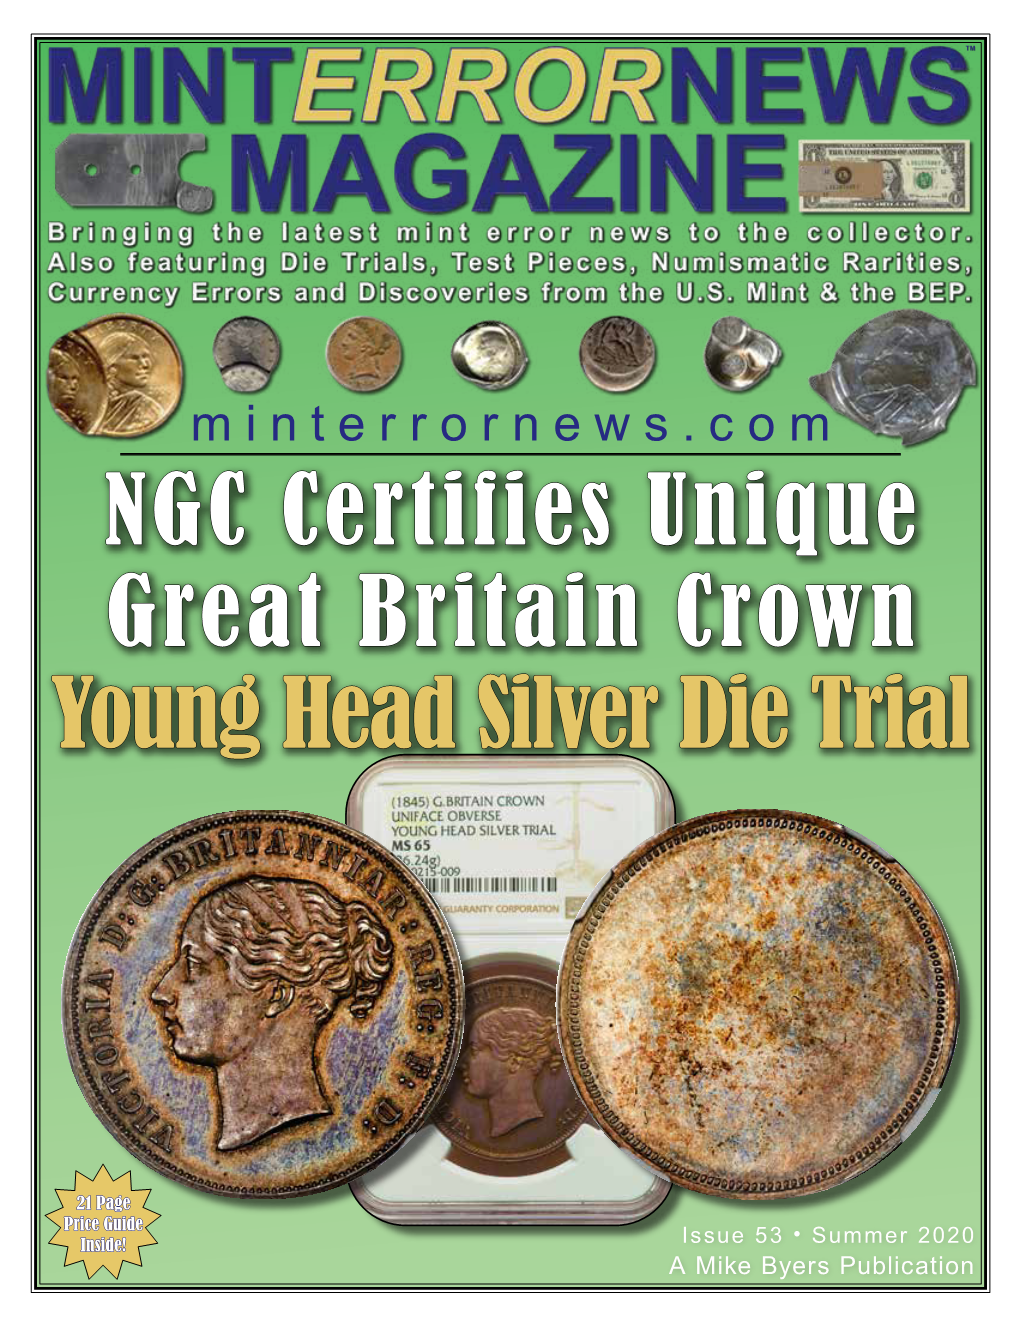 NGC Certifies Unique Great Britain Crown Young Head Silver Die Trial